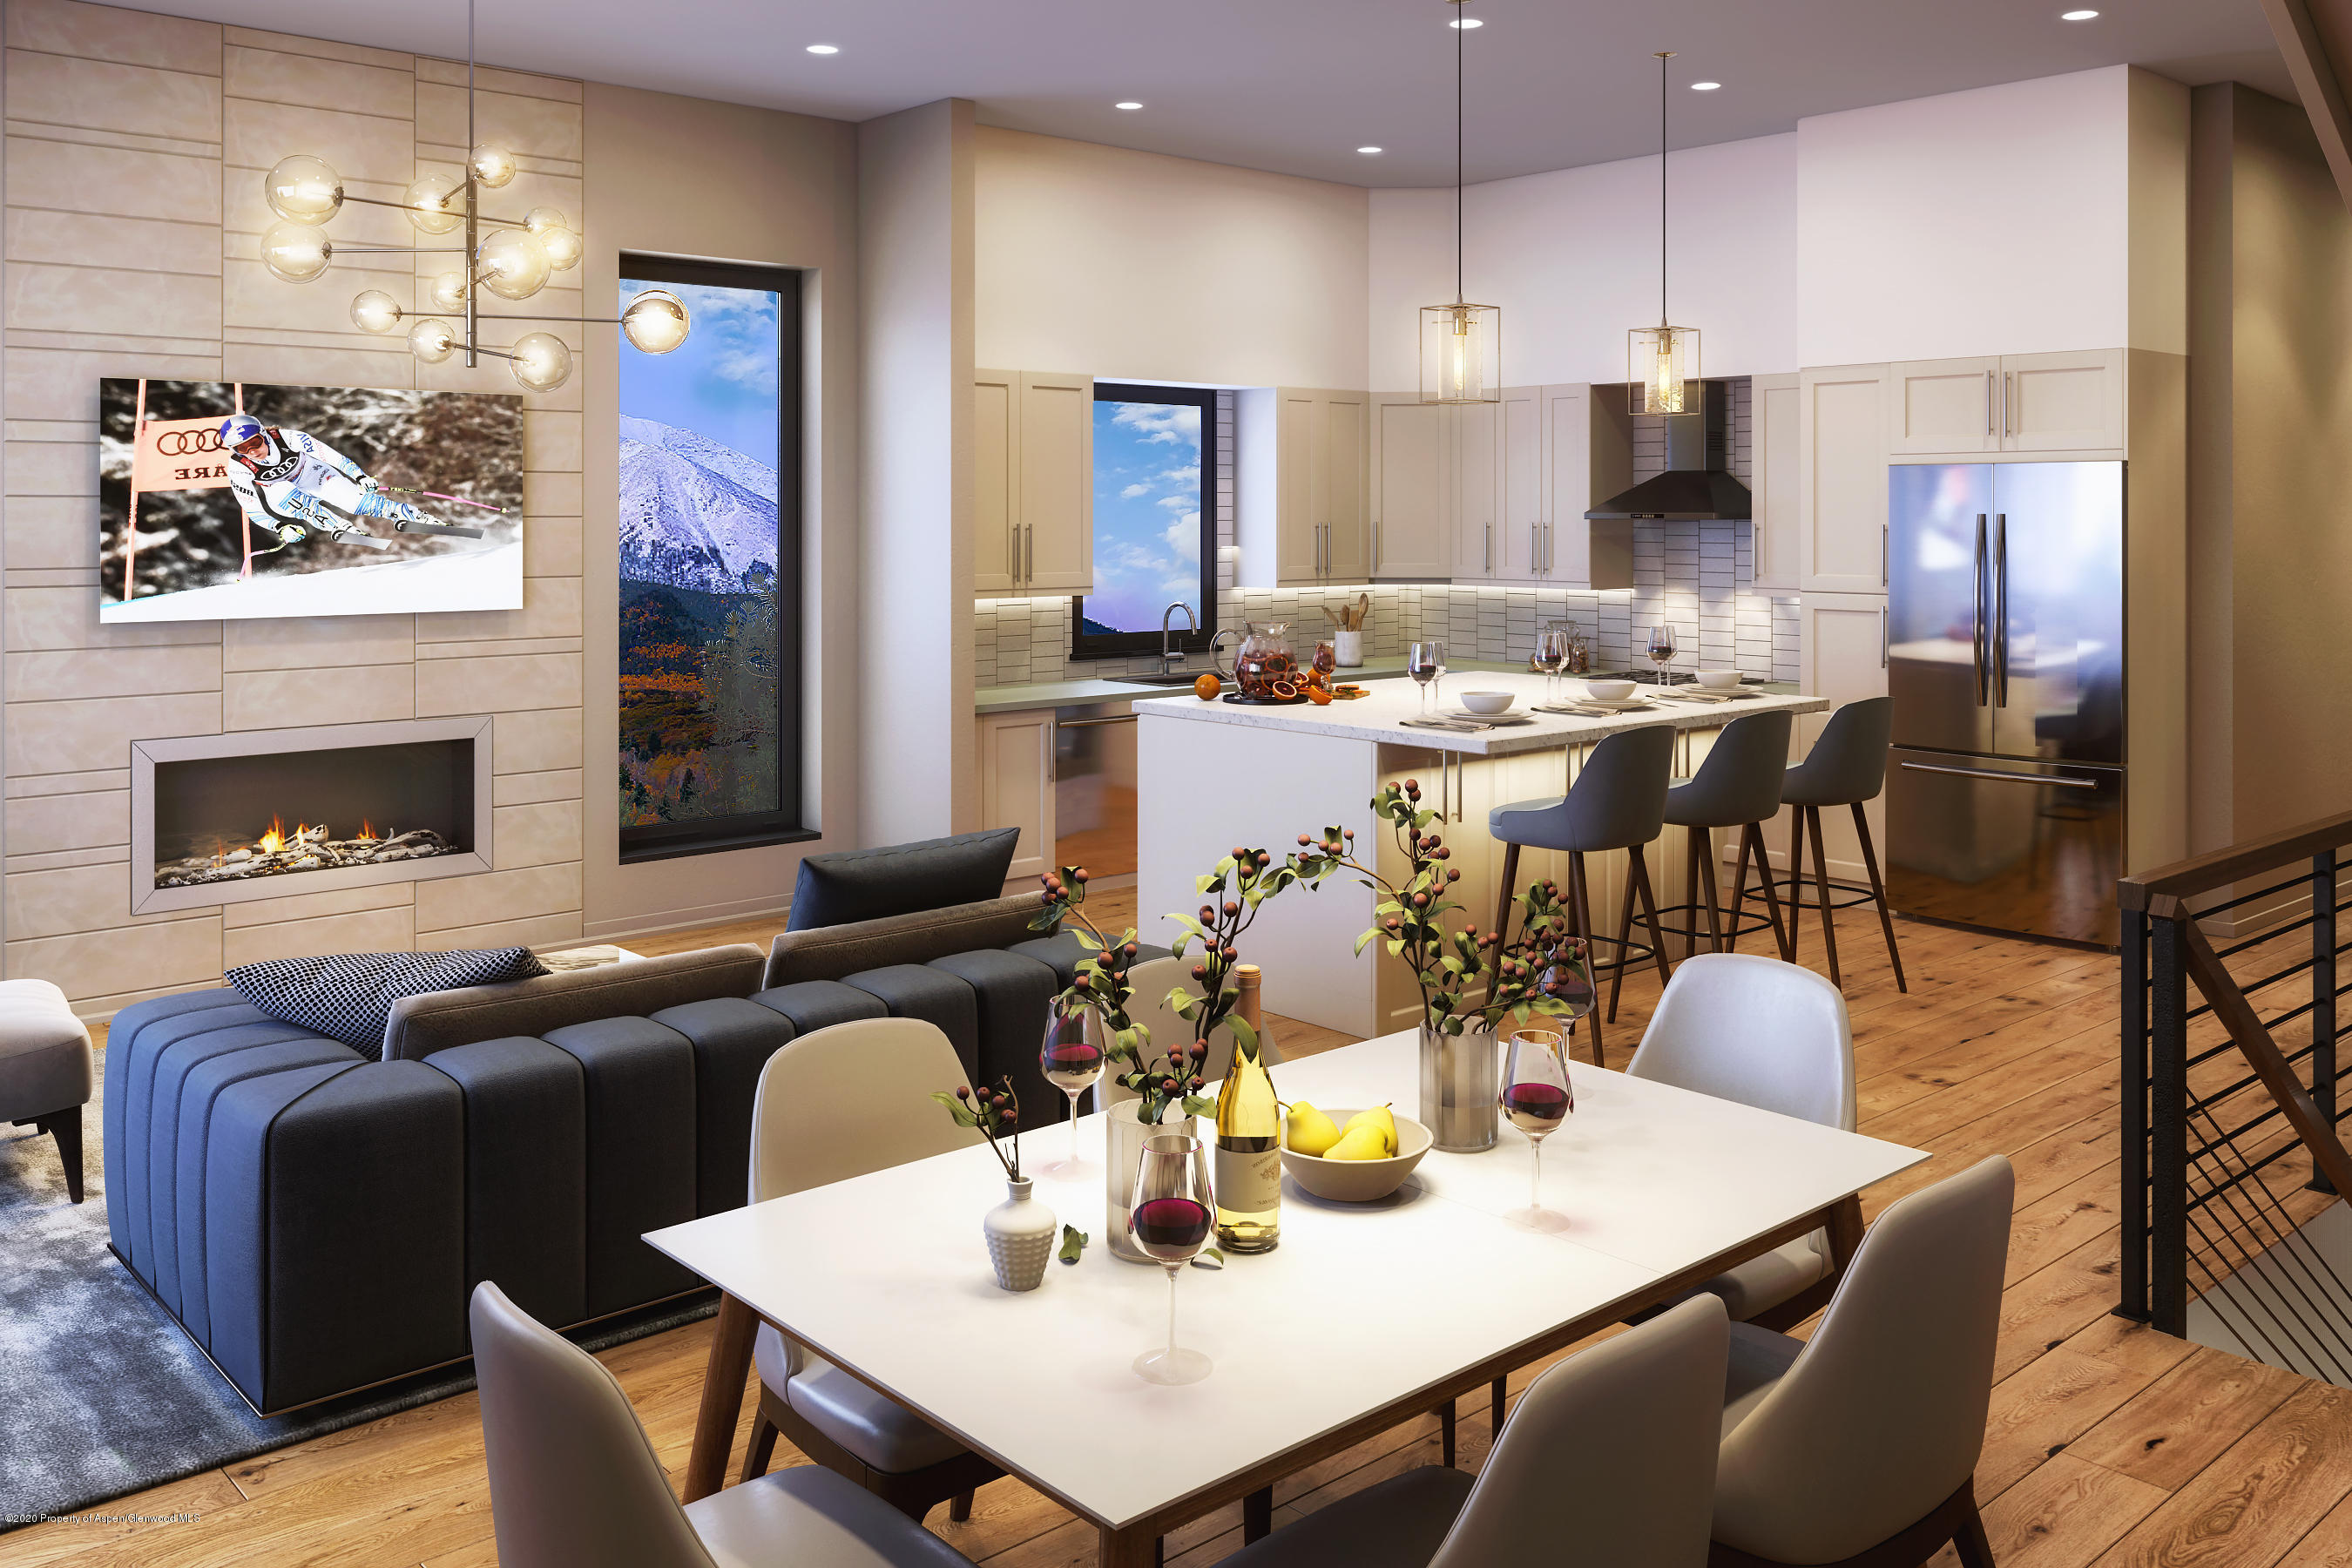 a dinning room with stainless steel appliances kitchen island granite countertop a dining table and chairs